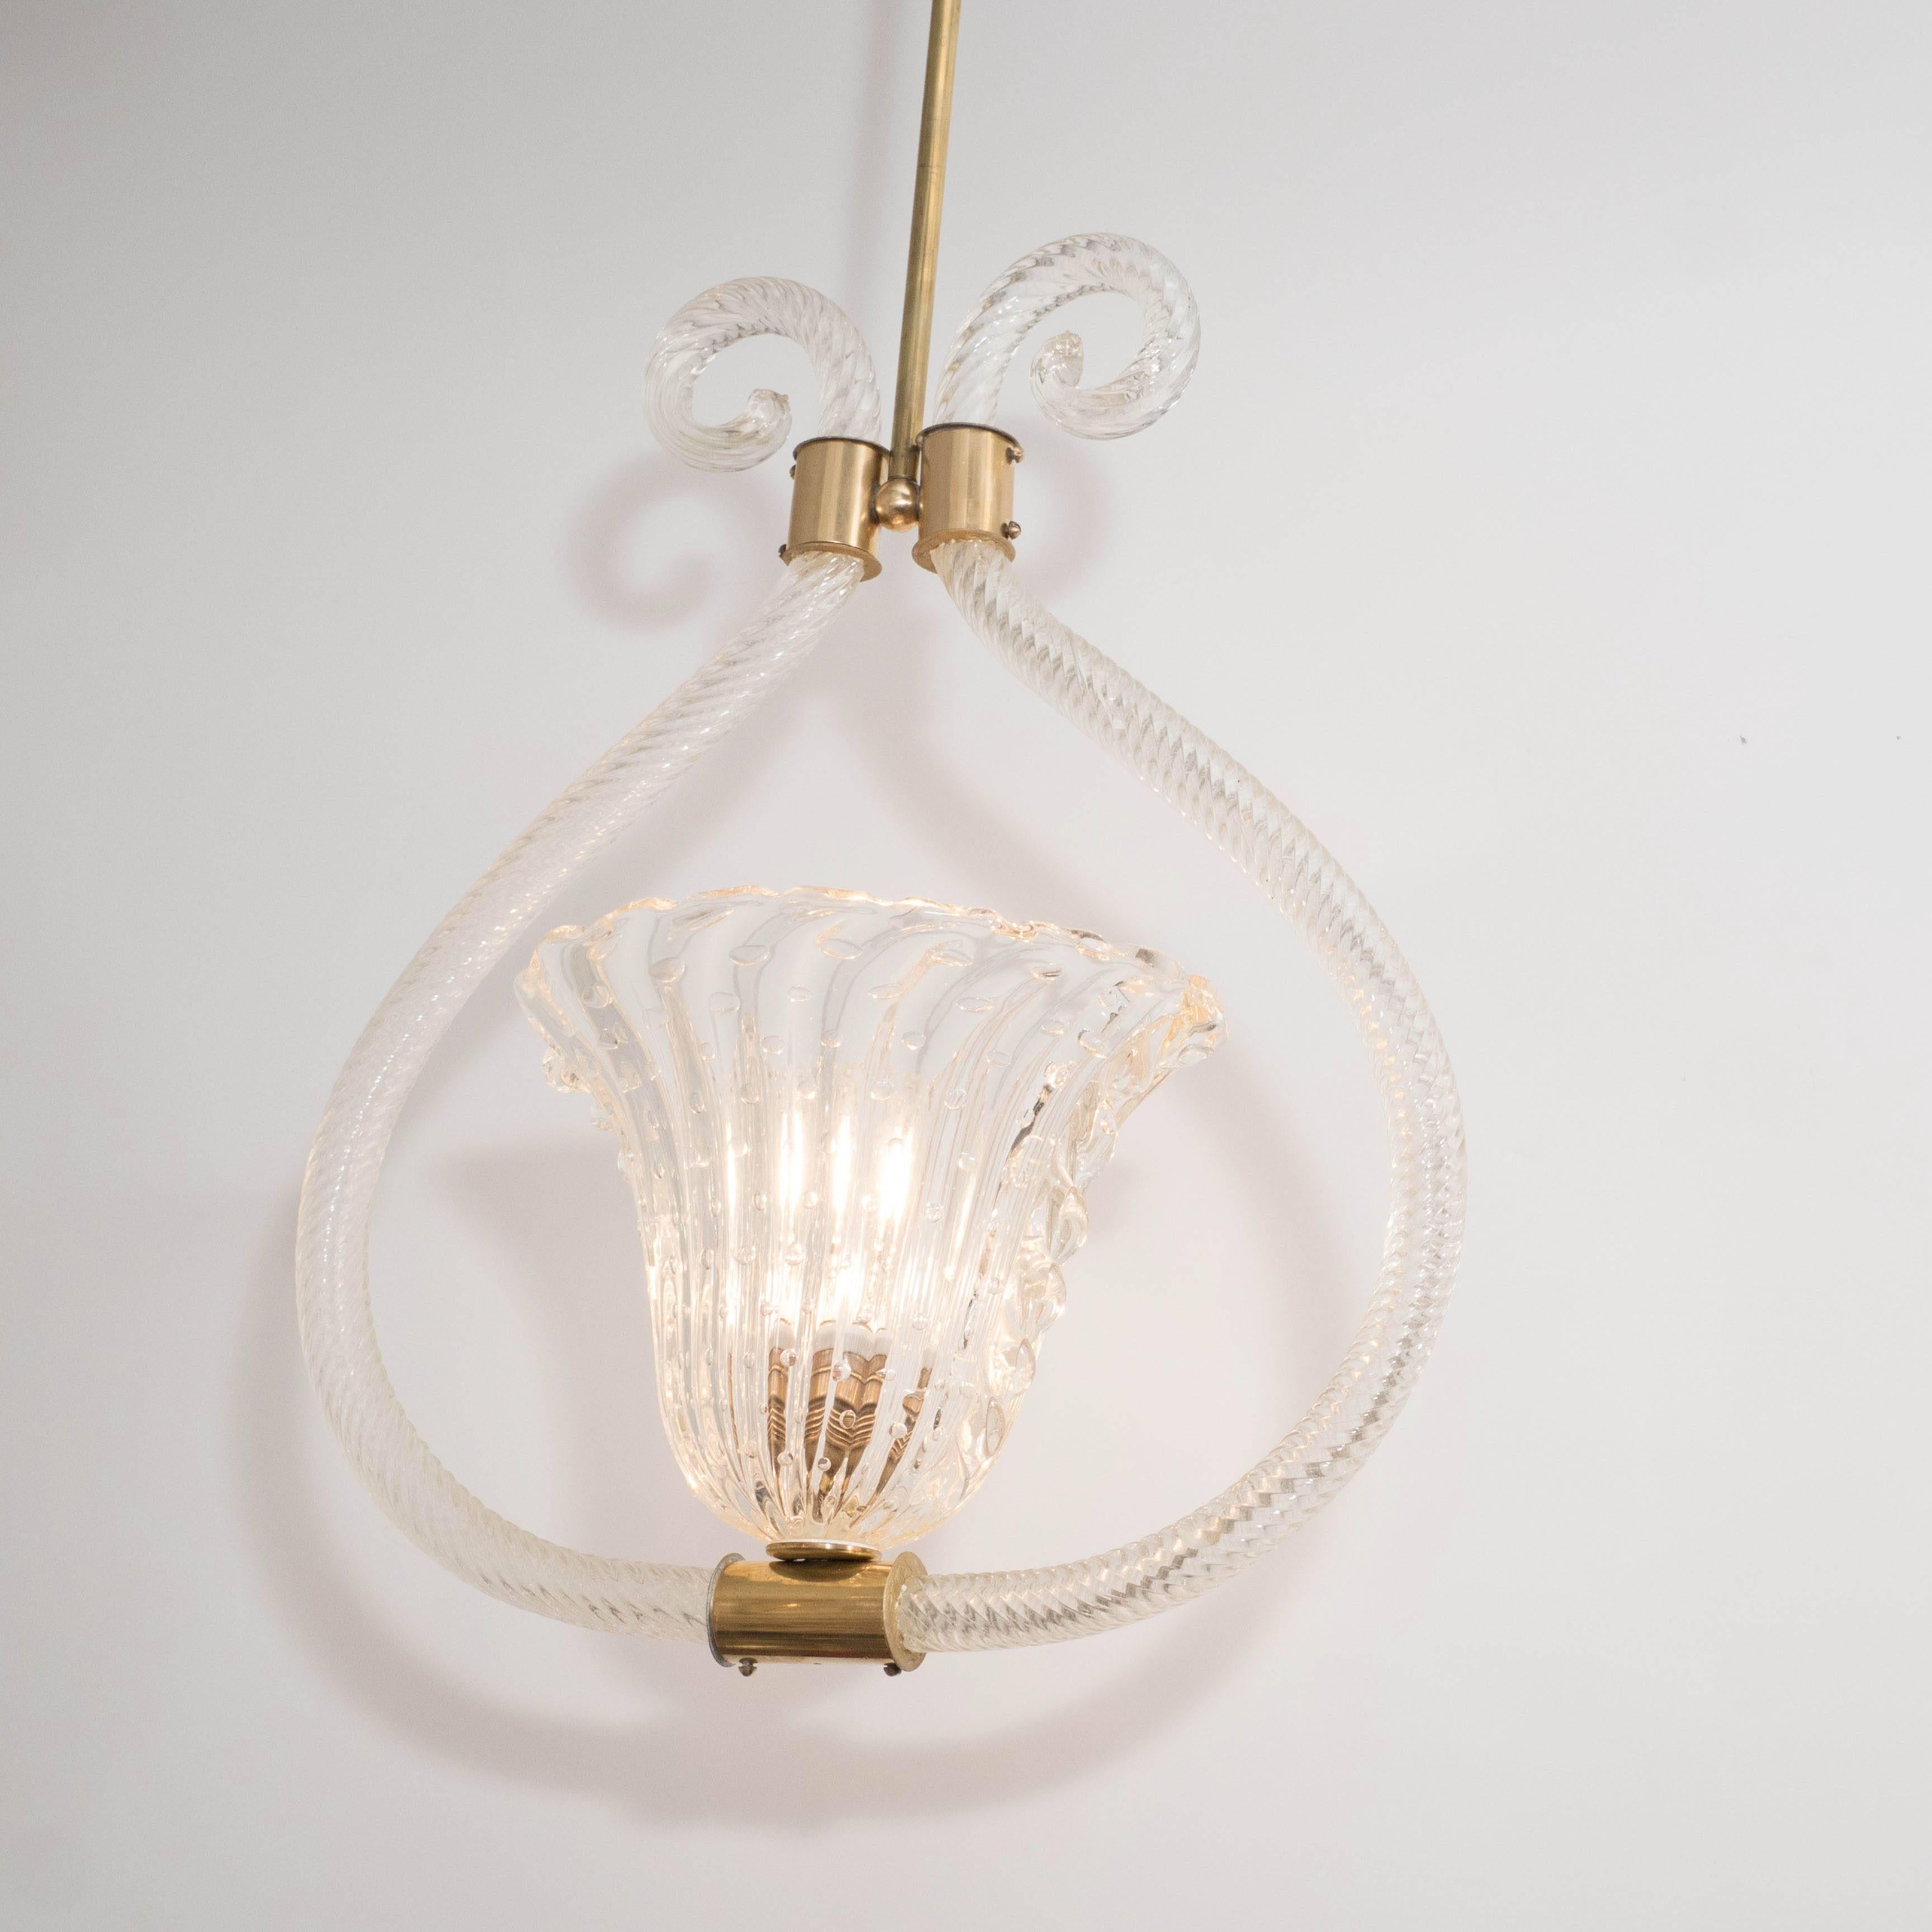 A Barovier e Toso pendant in handblown 'Bullicante' Murano glass and polished brass. A ribbed and controlled-bubble glass up-light shade supports a standard-size socket. A pair of ribbed tubular glass supports featuring scroll end-detailing are